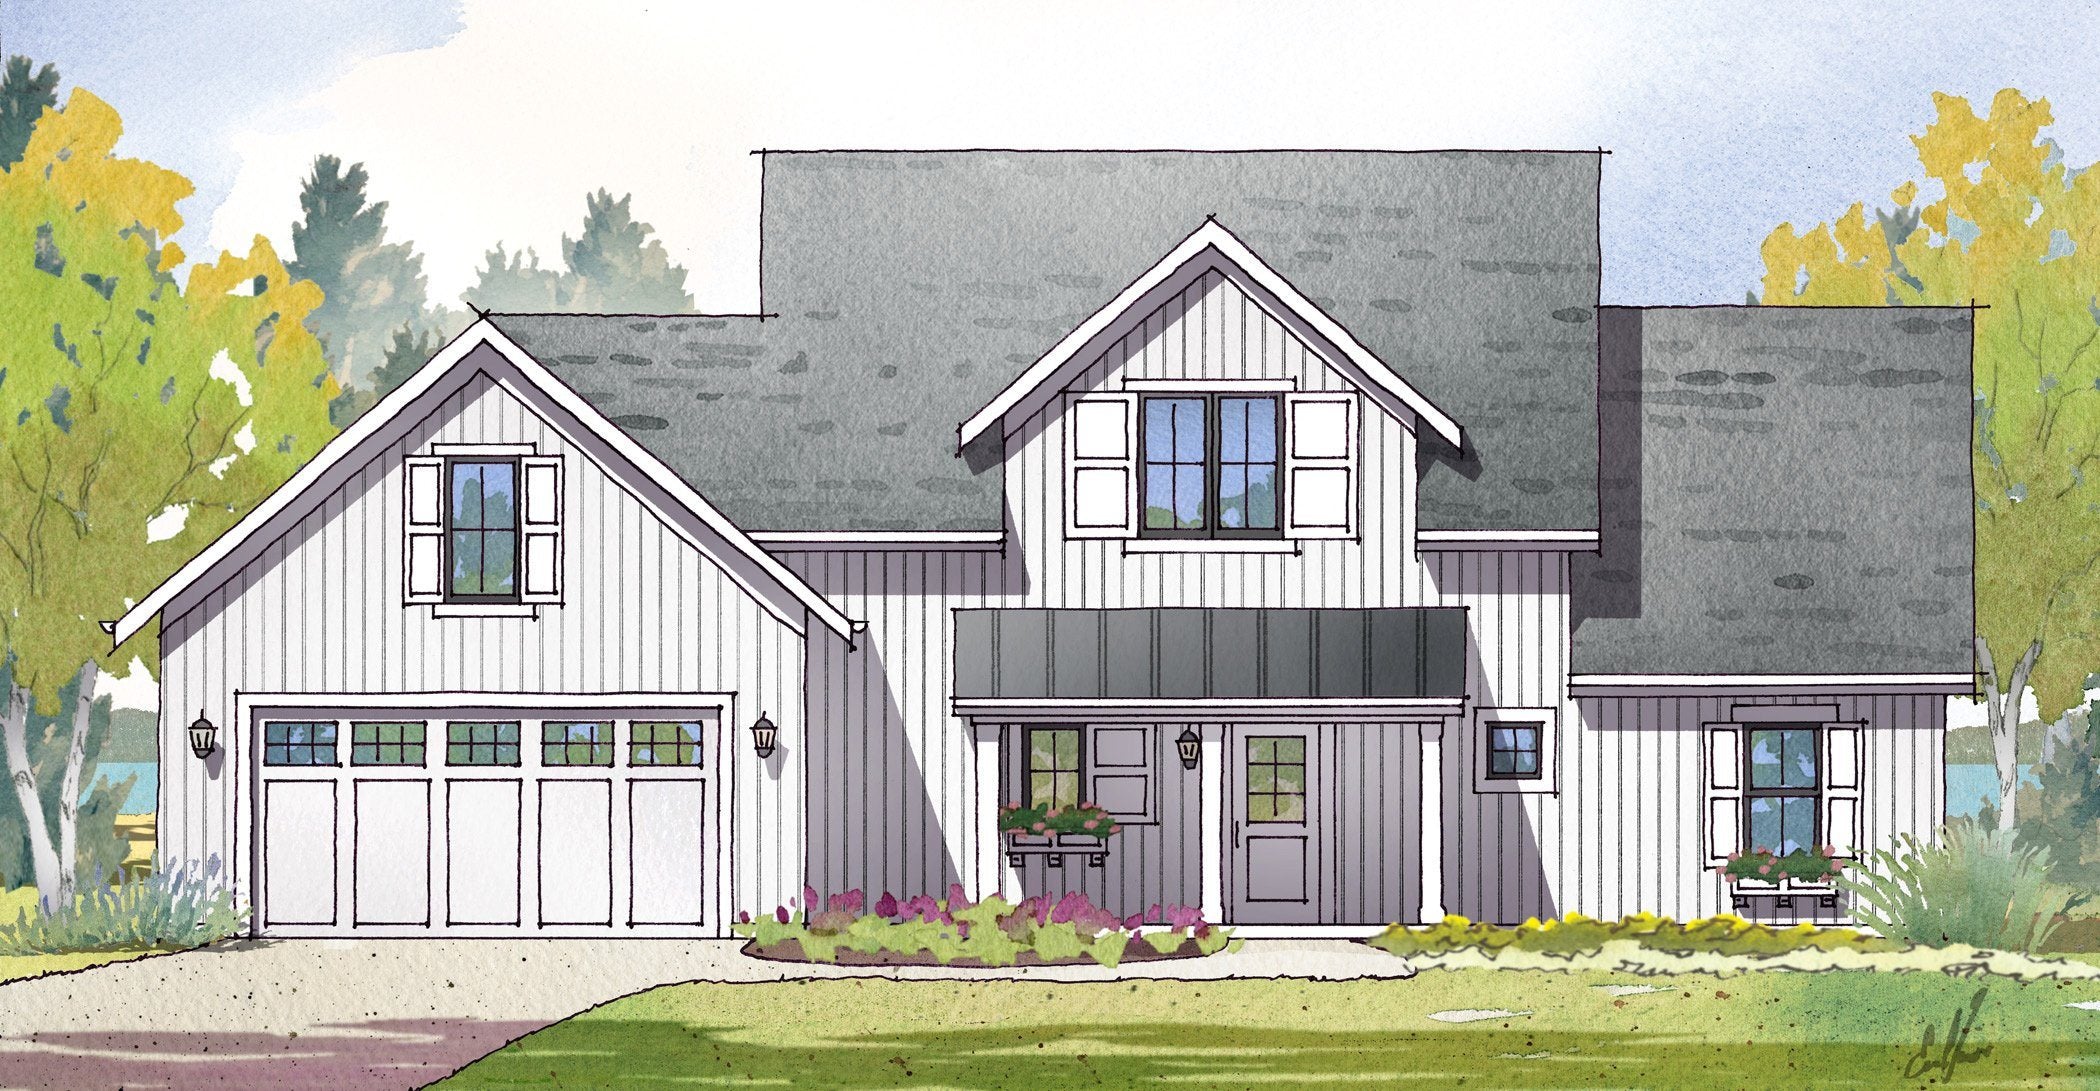 Tall Cedar - Home Design and Floor Plan - SketchPad House Plans